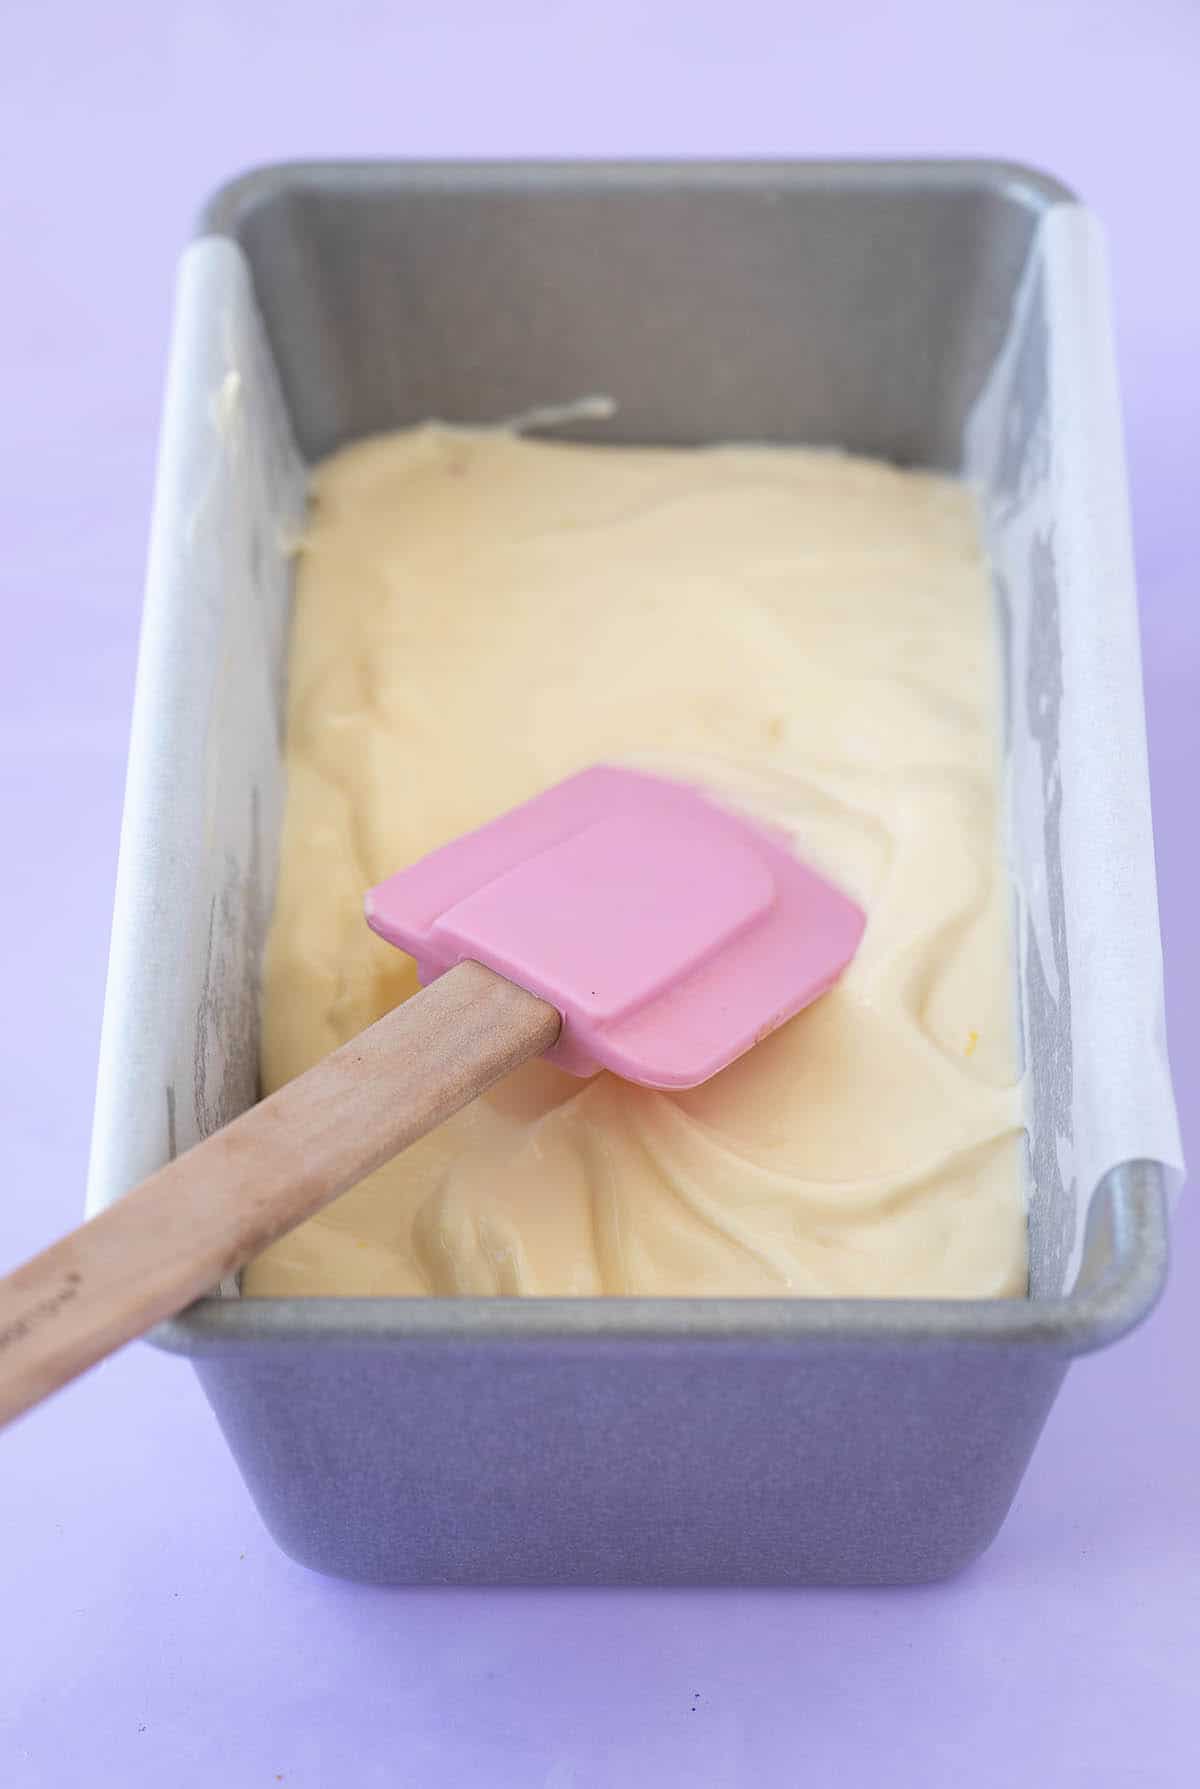 A small baking pan filled with creamy cheesecake batter